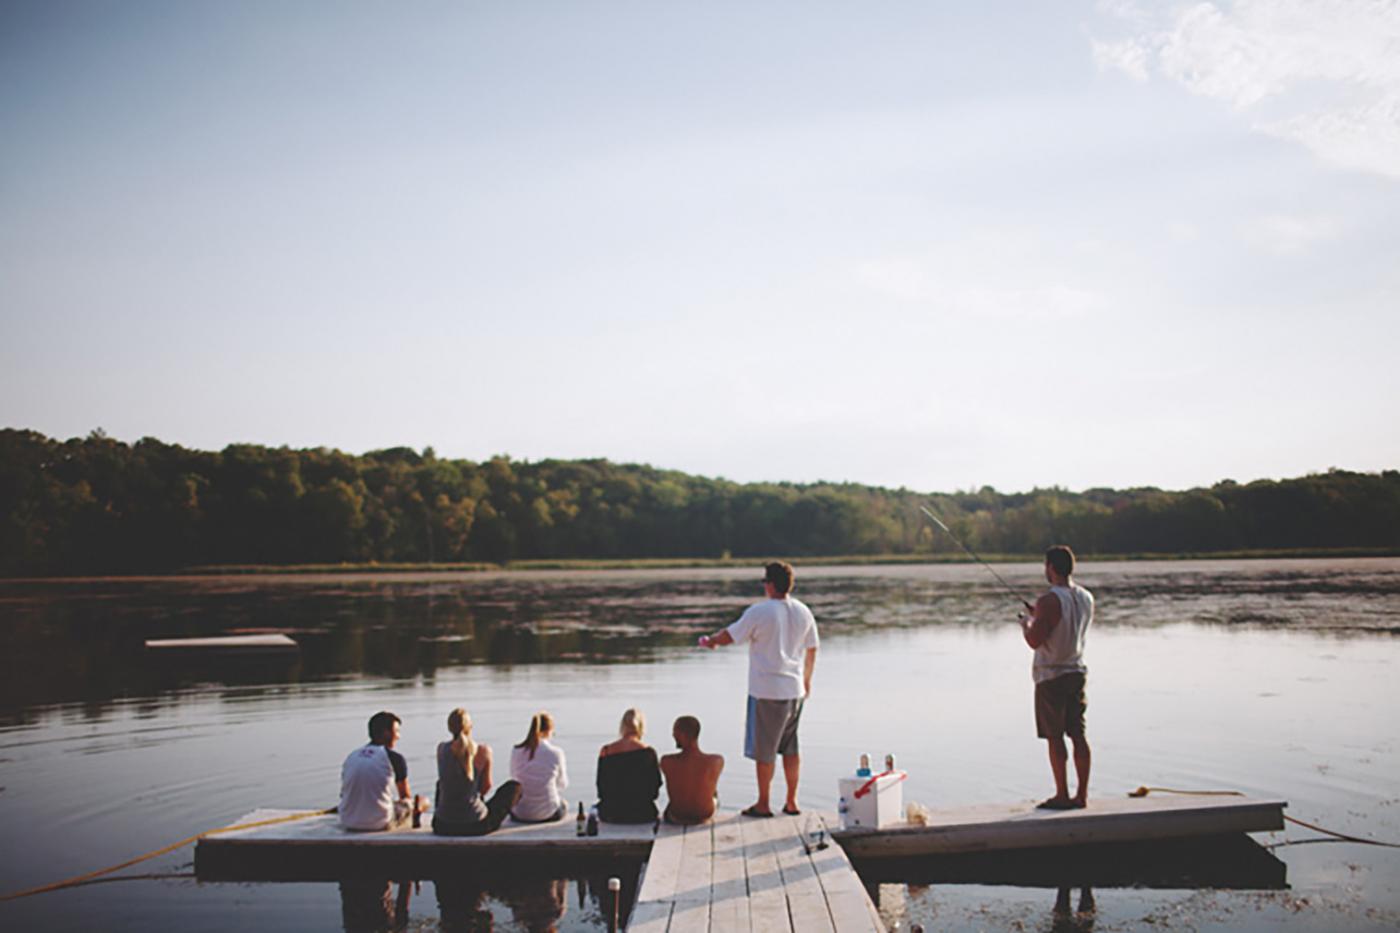 Get together with your family and friends at Camp Wandawega this summer.